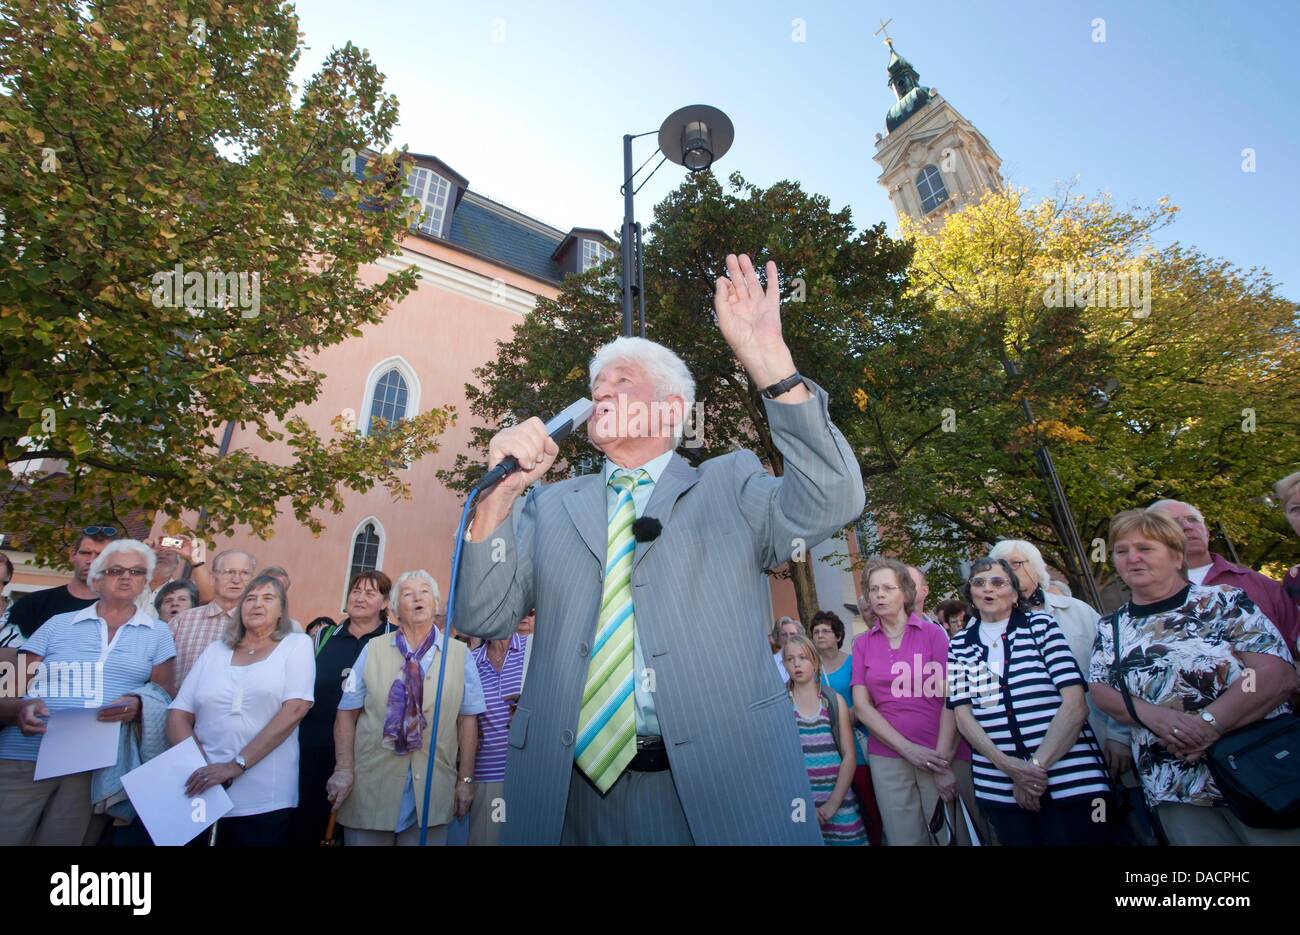 Choir leader Gotthilf Fischer (C) stands surrounded by a crowd singing folk songs on the market square in Eisenach, Germany, 30 September 2011. The event marks the prelude to the televised live event 'Die schoensten deutschen Volkslieder' (The most beautiful German folk songs) of German broadcasting station MDR, which nominates the most favourite song. Photo: Michael Reichel Stock Photo